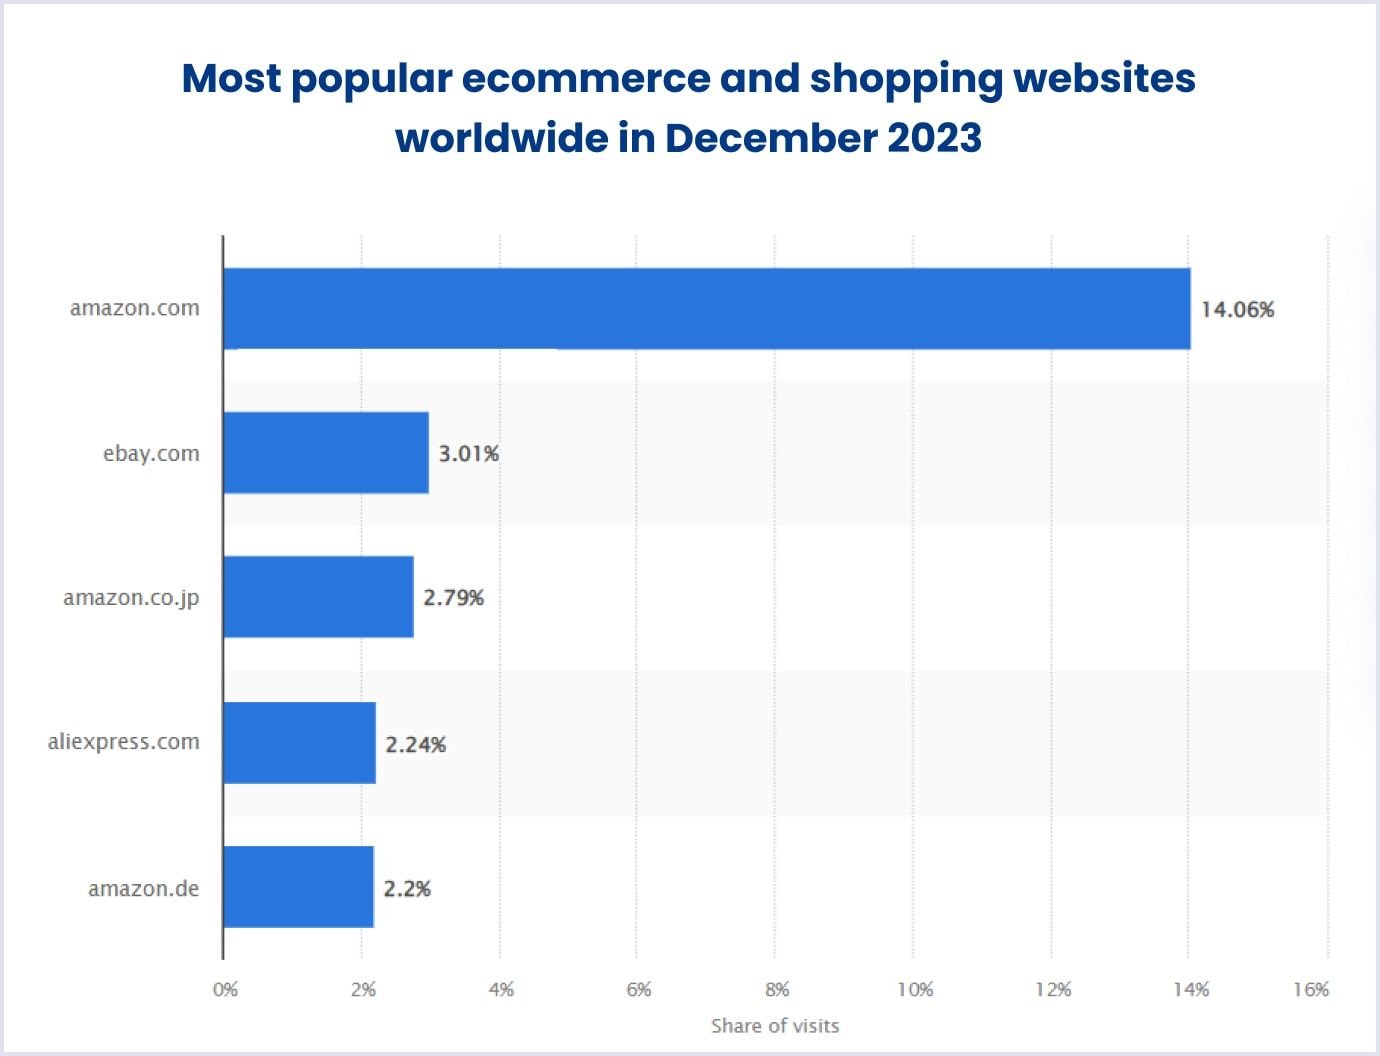 eBay as one of the most popular e-commerce websites worldwide in 2023